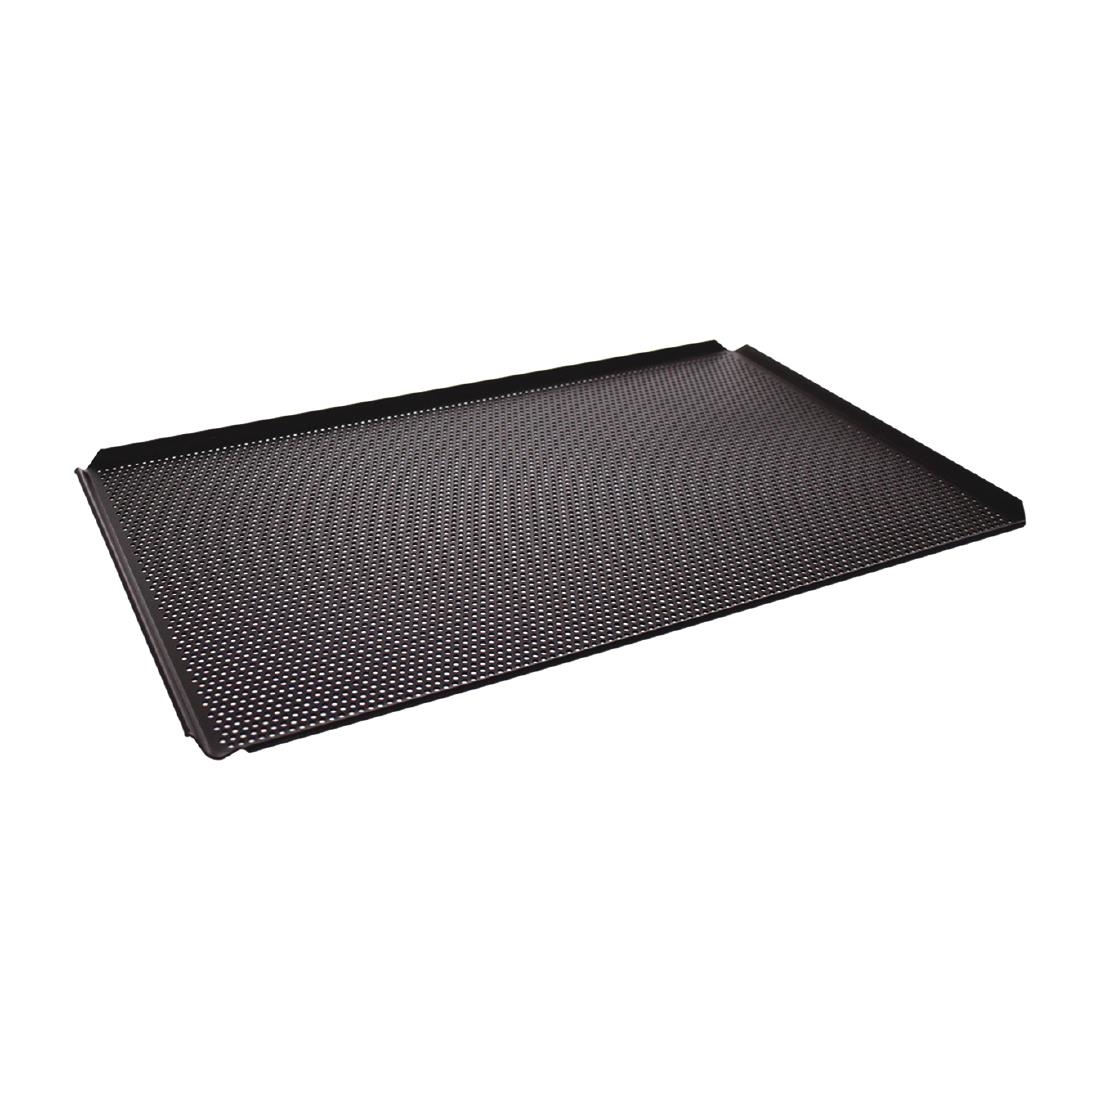 Schneider Tyneck Non-Stick Perforated Baking Tray 530 x 325mm